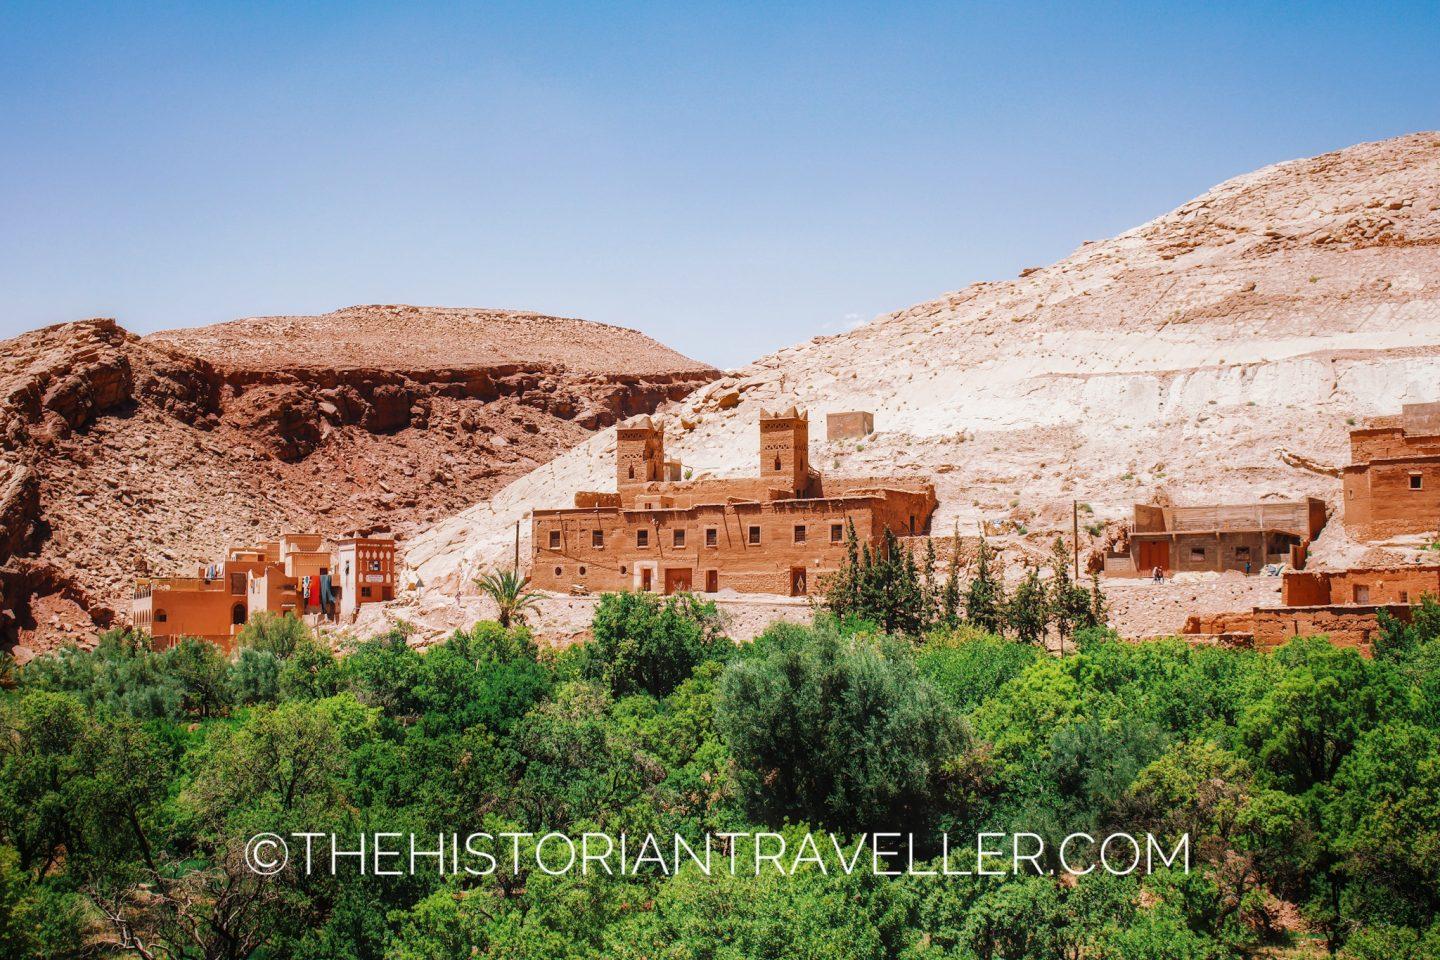 Road of Thousand Kasbahs itinerary - Berber domestic architecture in the High Atlas Mountains